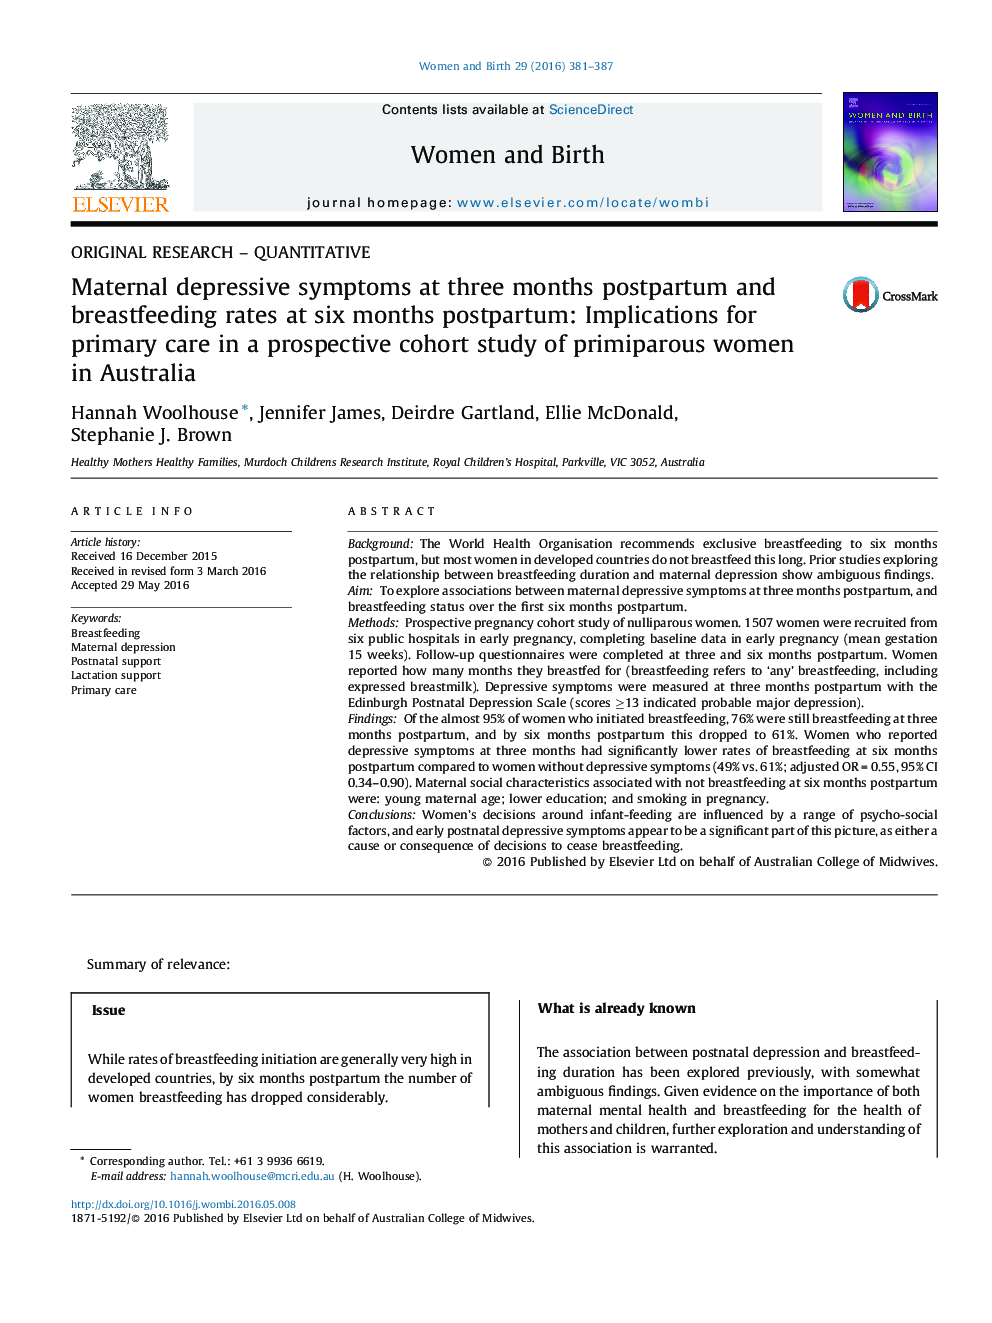 Maternal depressive symptoms at three months postpartum and breastfeeding rates at six months postpartum: Implications for primary care in a prospective cohort study of primiparous women in Australia